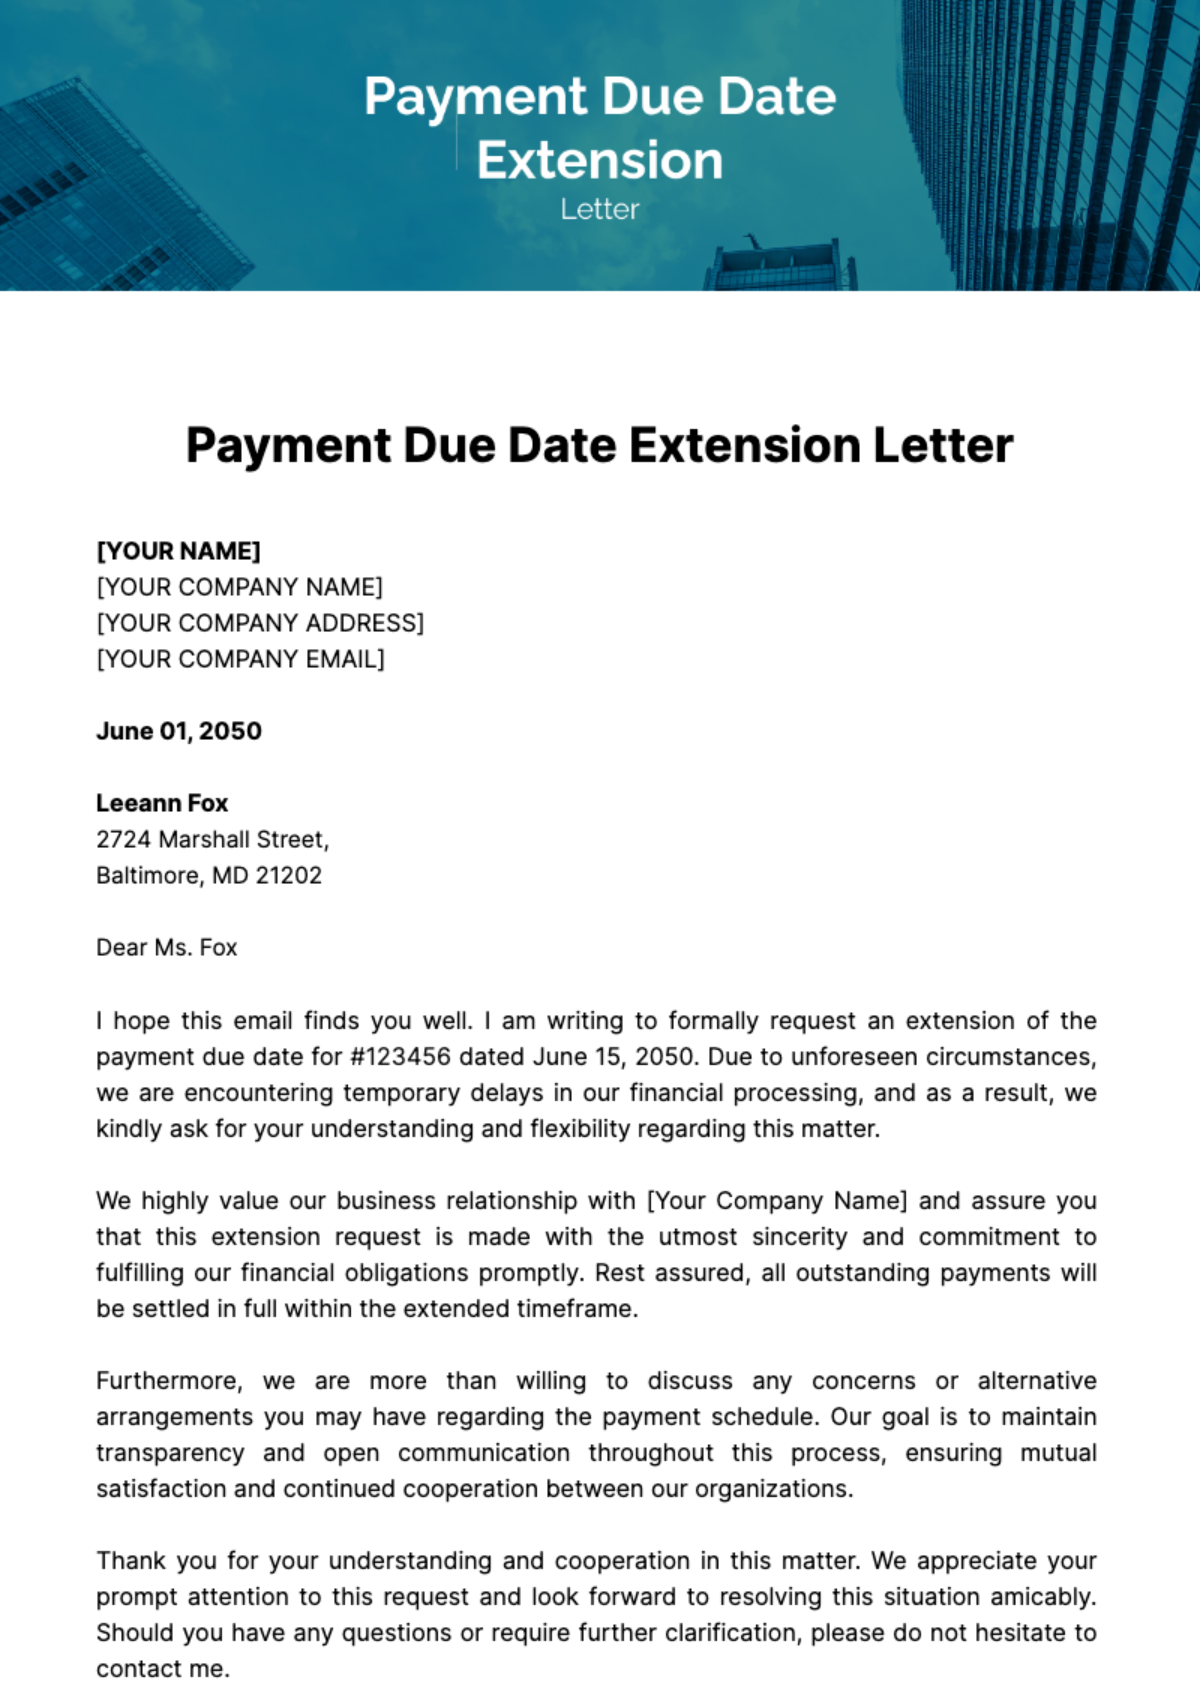 Payment Due Date Extension Letter Template